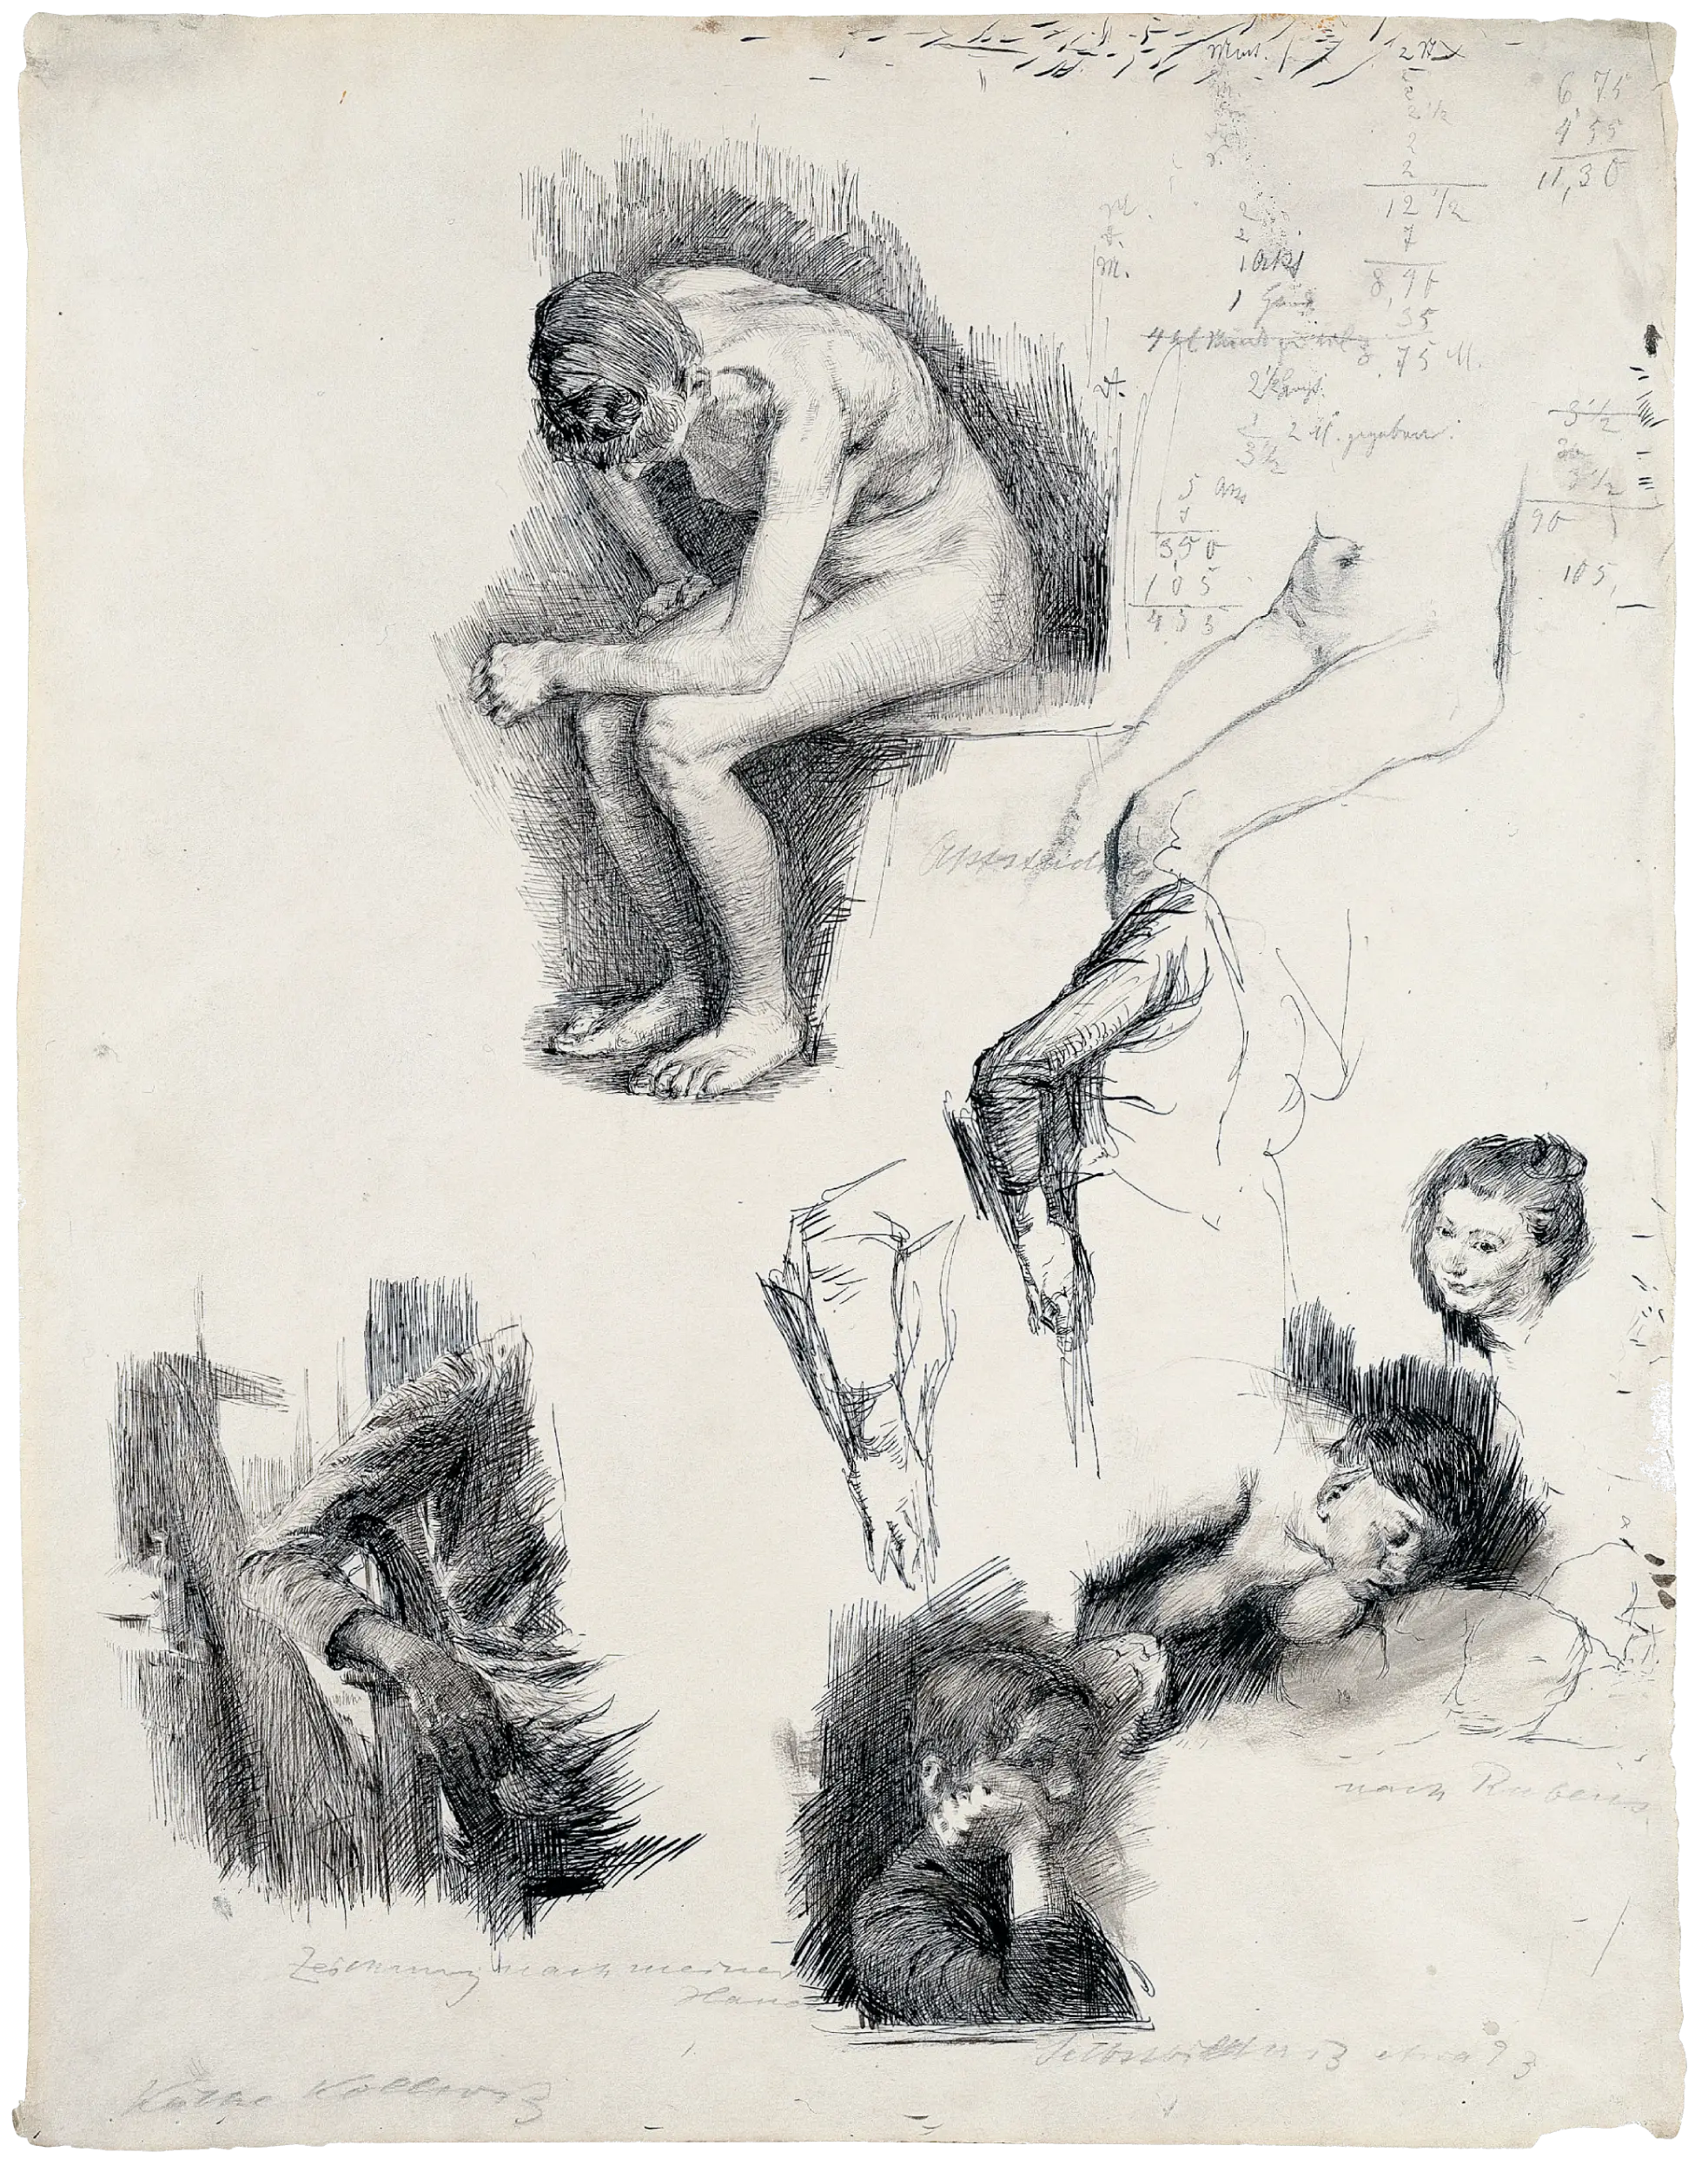 Käthe Kollwitz, Study Sheet with Sketches, after Rubens and self-portrait, 1890/91